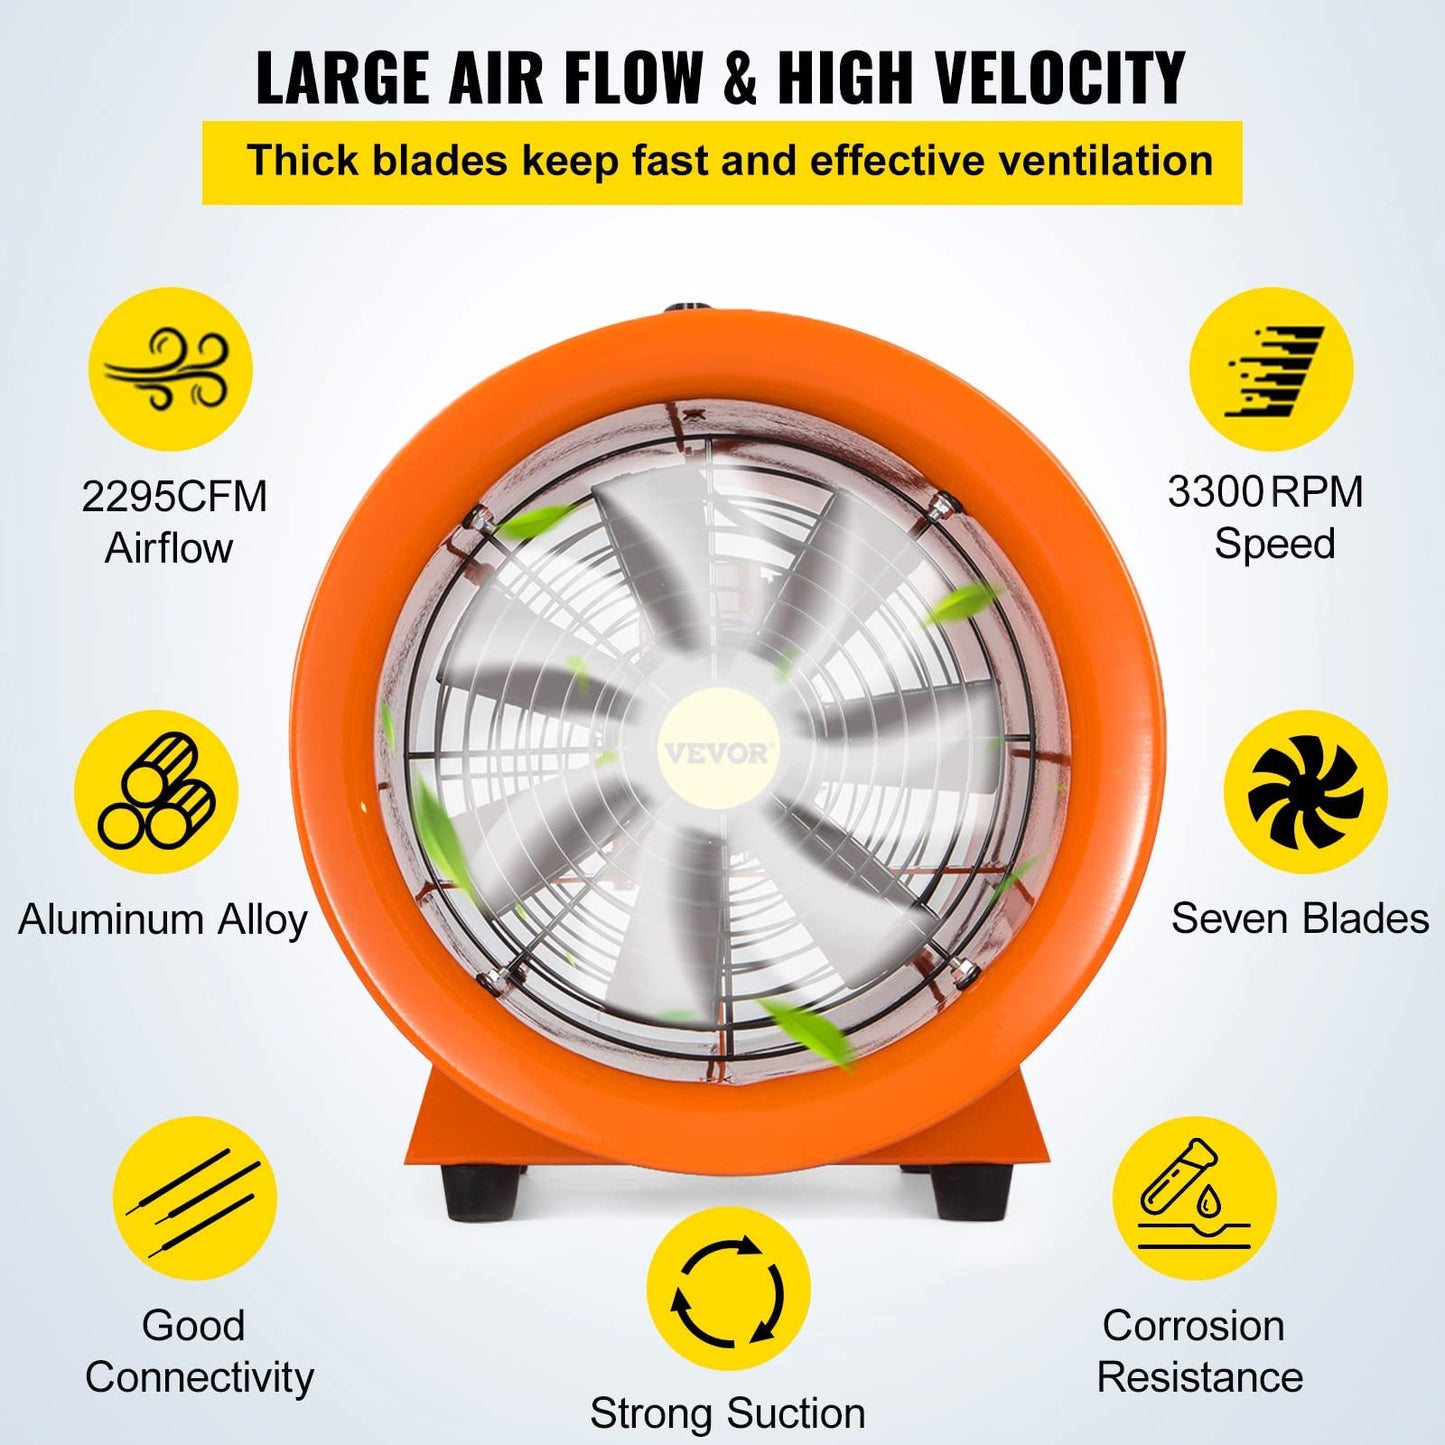 VEVOR Utility Blower/Exhaust Axial Hose Fan, 12 Inches, 3900 m3/h High Velocity Portable Ventilator, Low Noise Extractor Fan Blower with 16 ft / 5 m